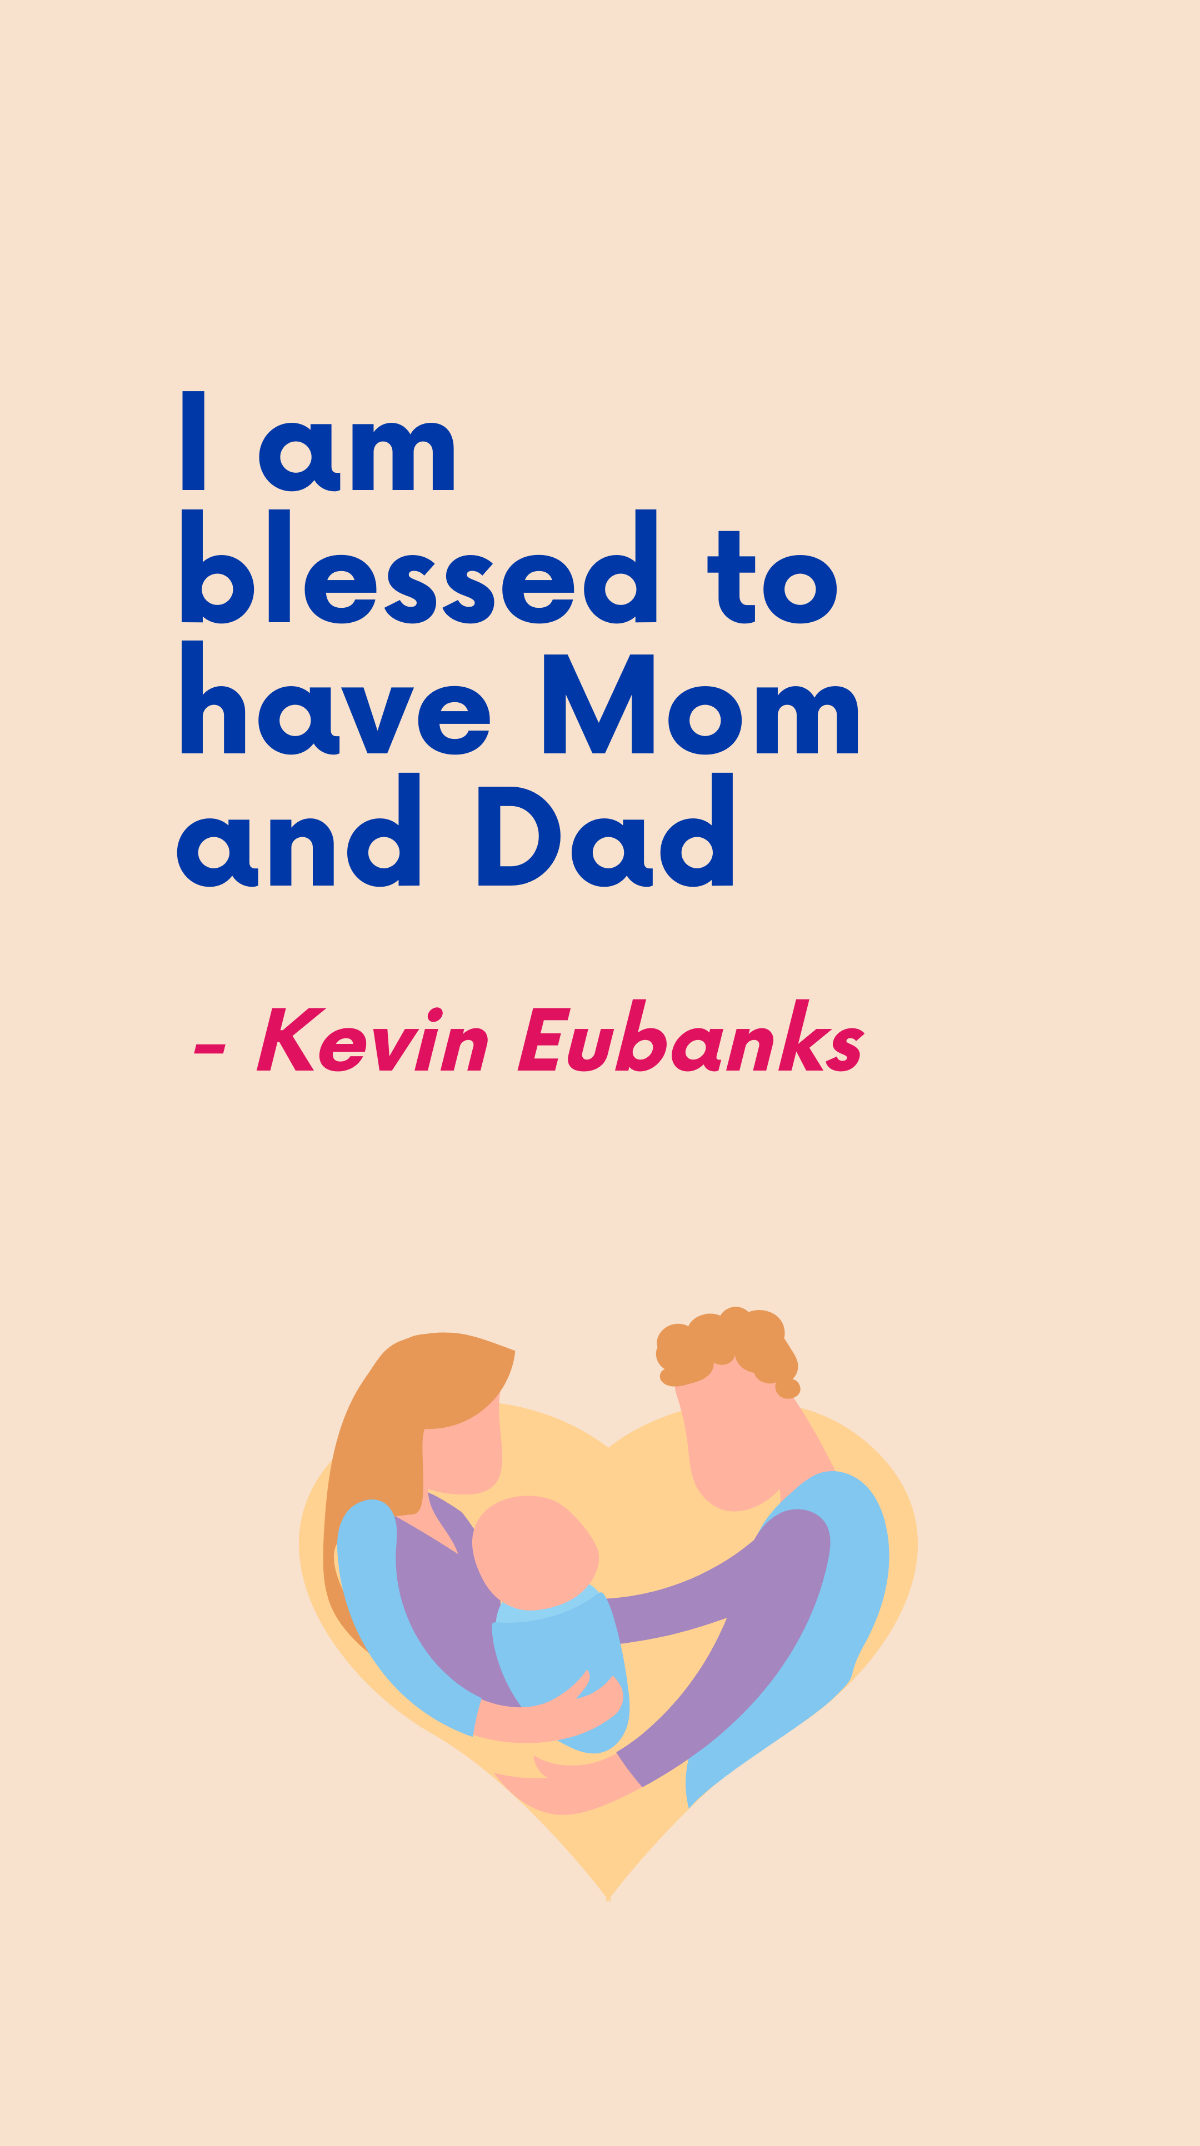 Free Kevin Eubanks - I am blessed to have Mom and Dad Template